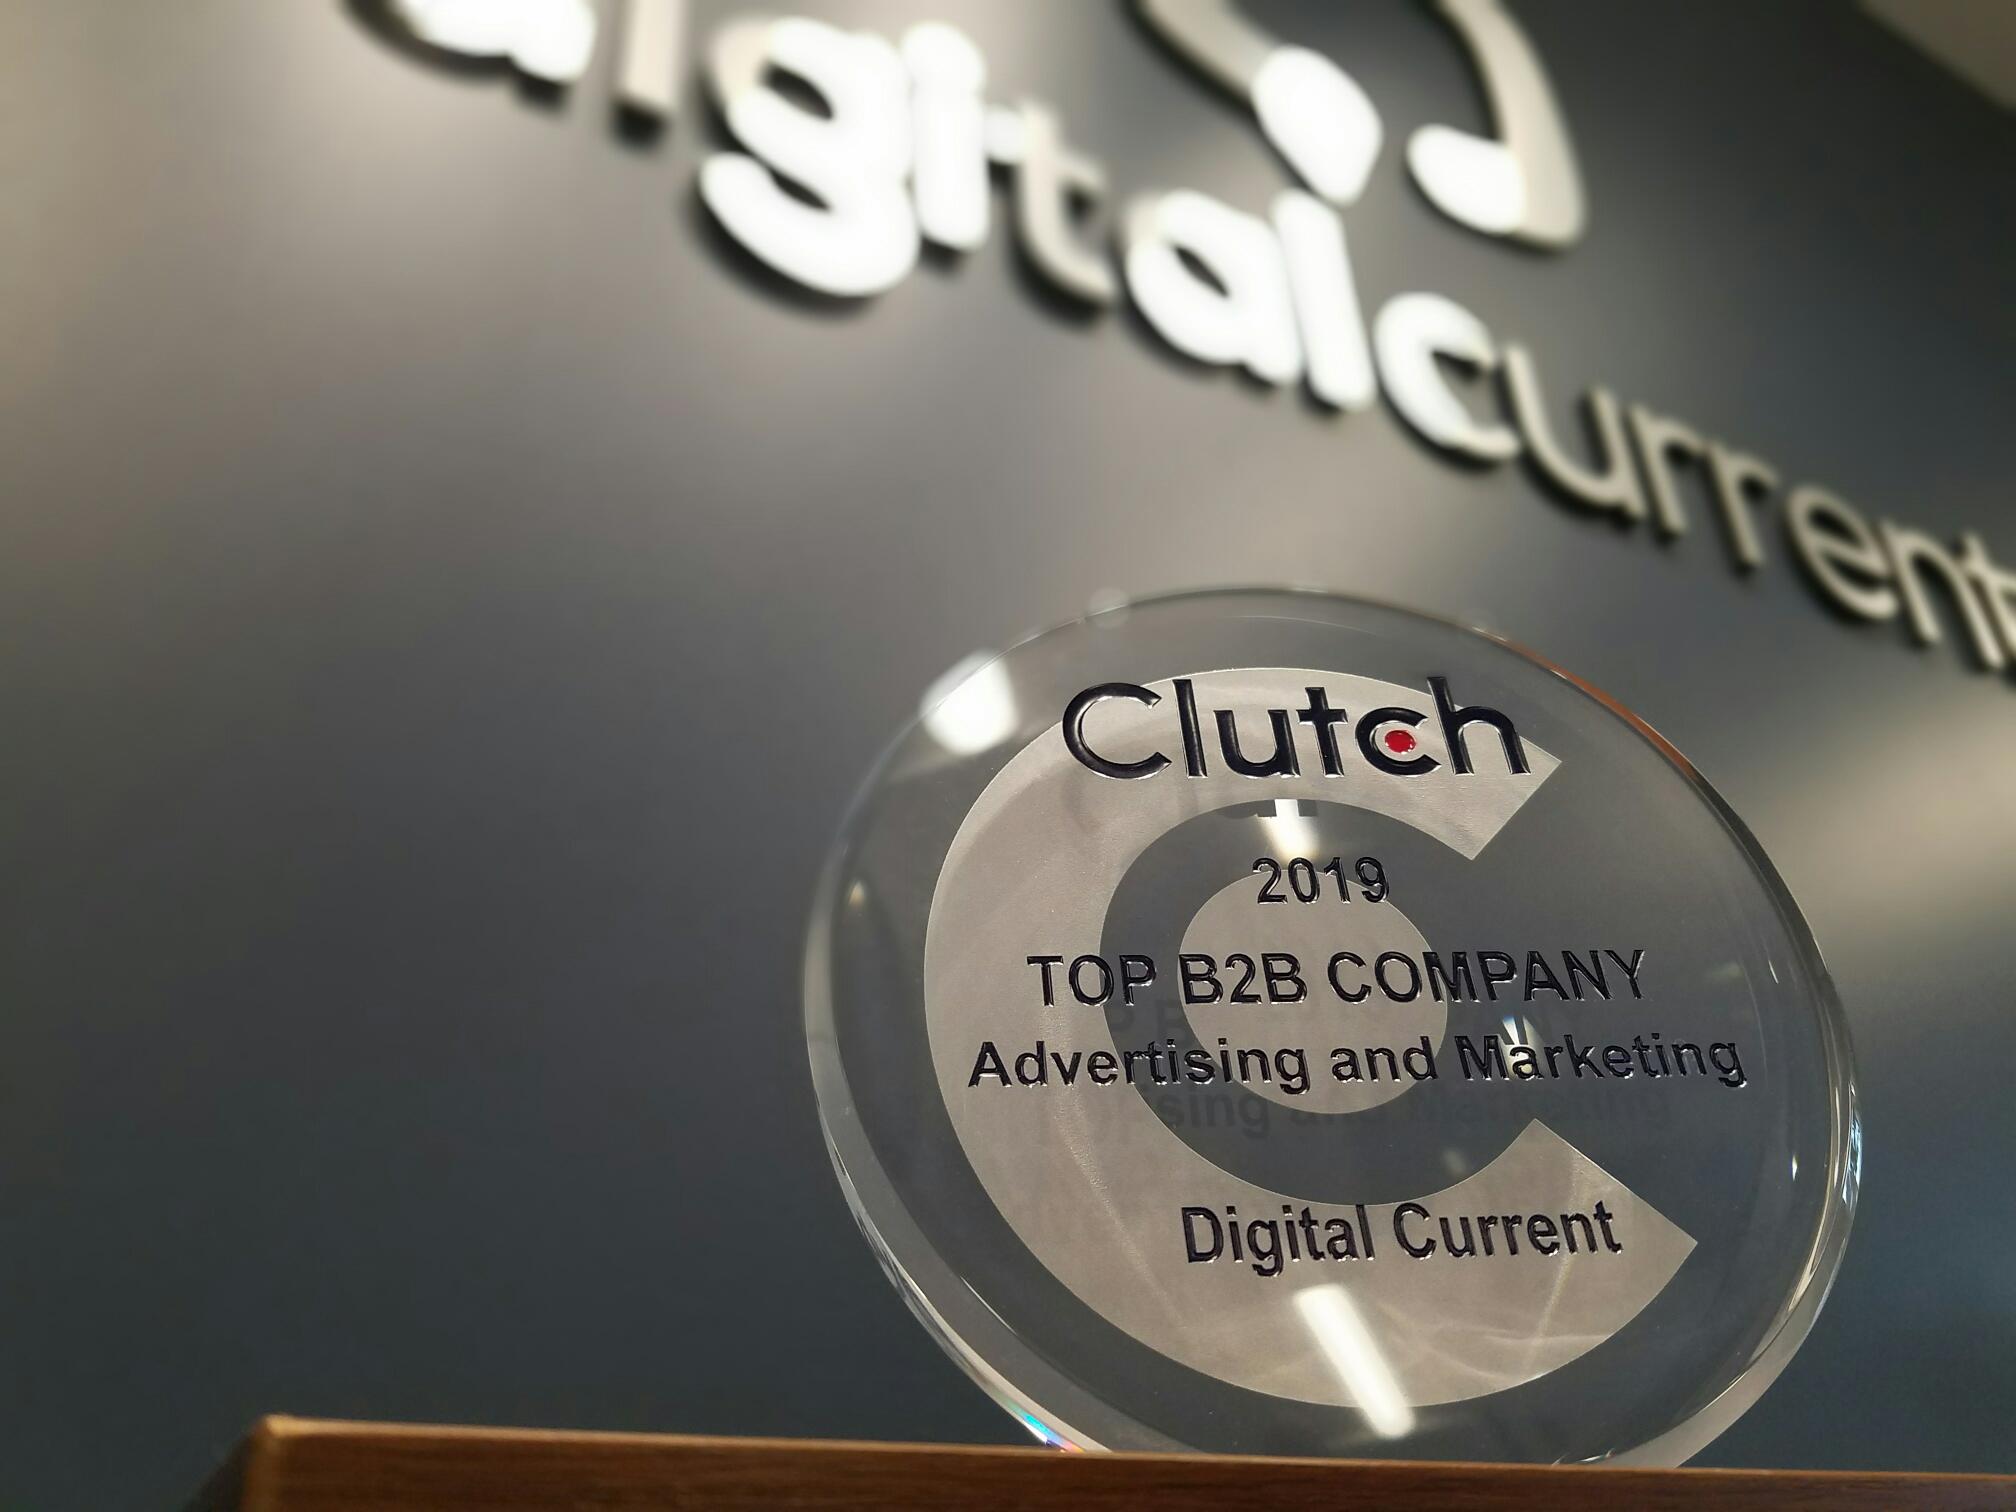 Digital Current Recognized as a Top SEO Company in Arizona by Clutch for 2019 Featured Image